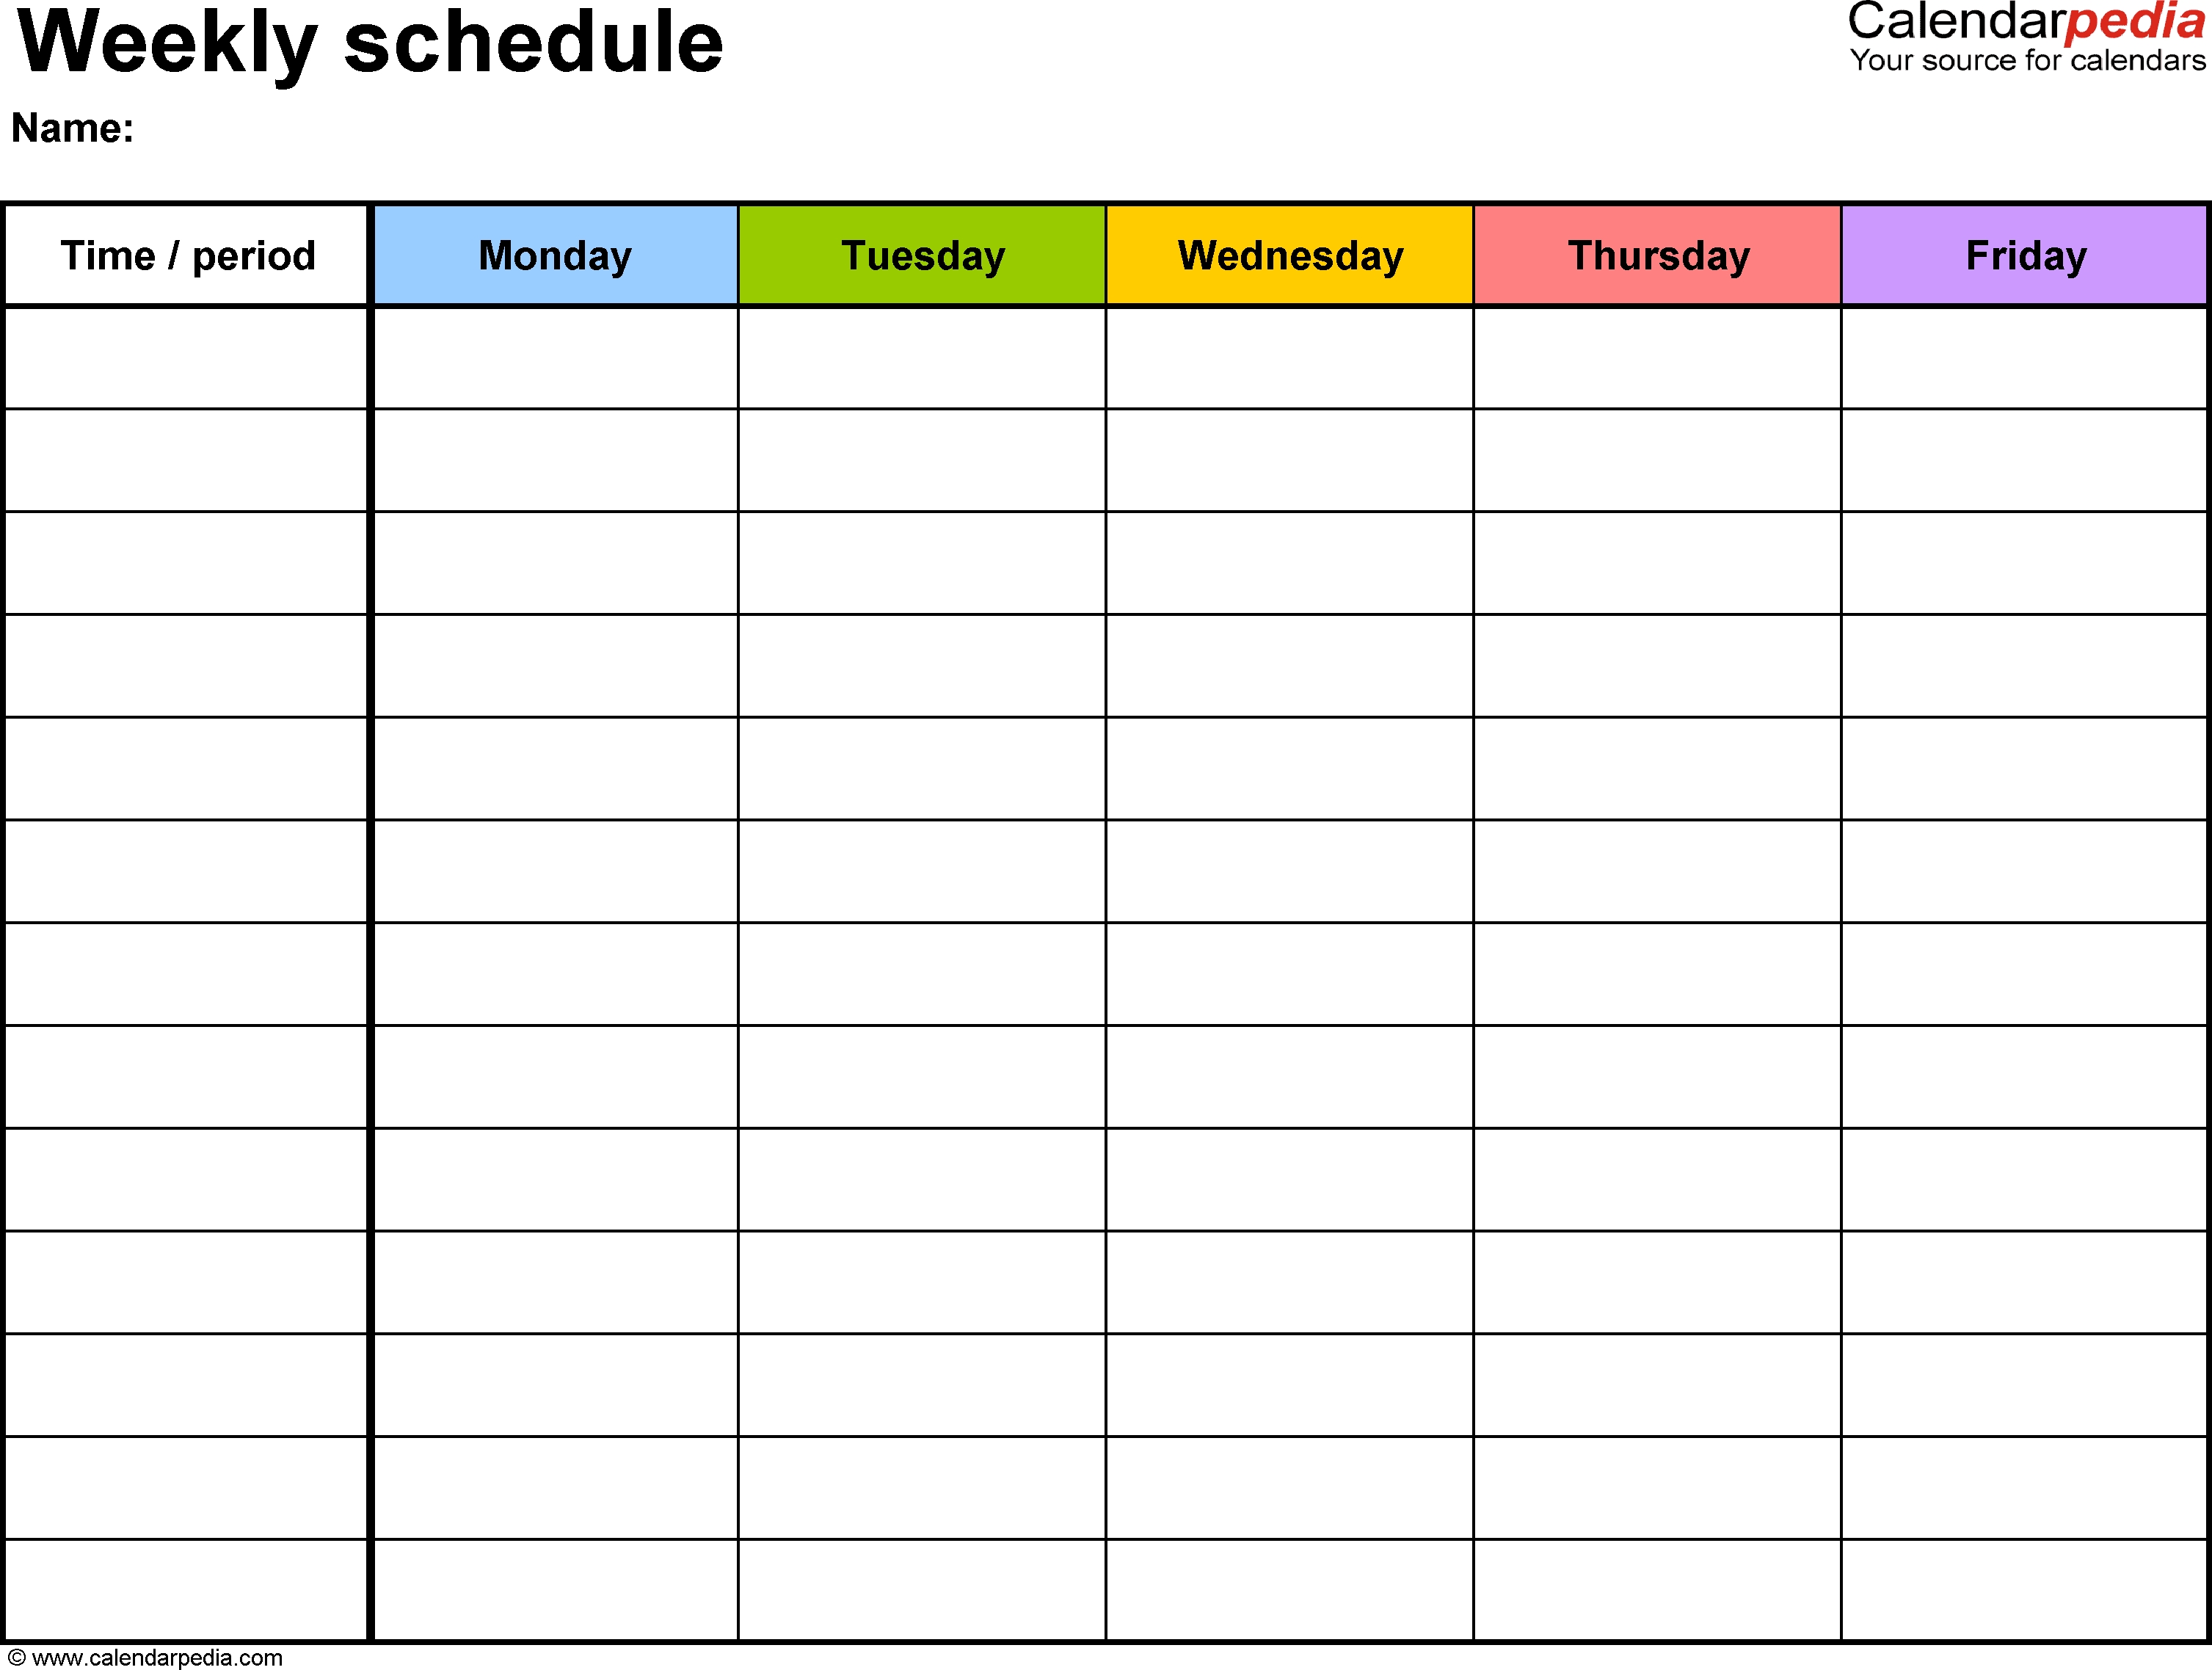 Free Weekly Schedule Templates For Word - 18 Templates Perky Blank Calendar Template 5 Days